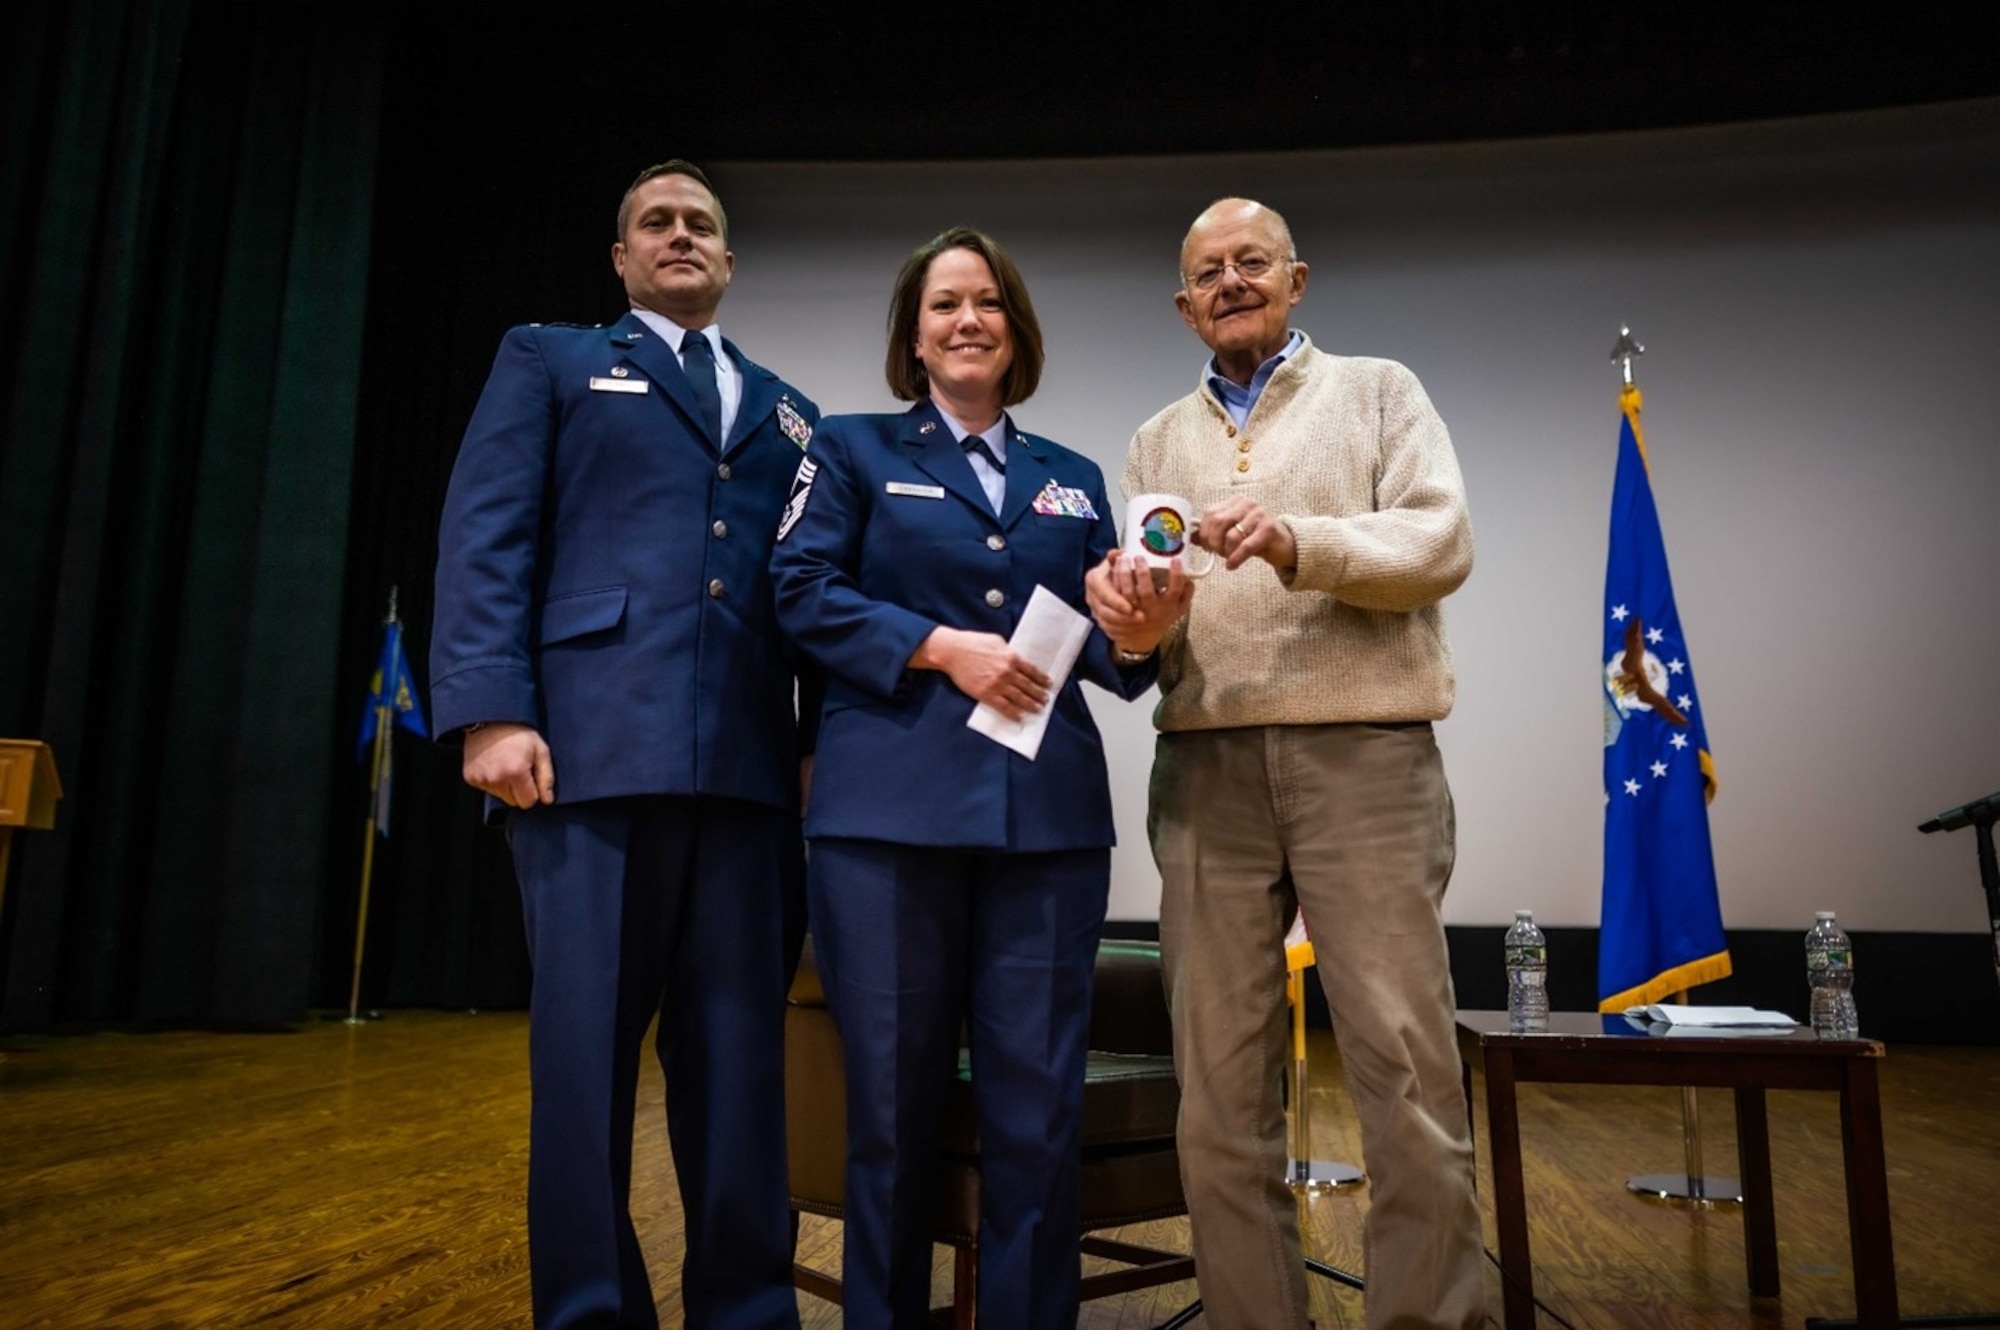 Lt. Col. John Durkee, 16th Intelligence Squadron commander (left), and Chief Master Sgt. Rebecca Casanova, 16 IS Senior Enlisted Leader (center), present a 16 IS mug and coin to Lt. Gen. (Ret.) James Clapper during the Feb. 4, 2023 unit training assembly. Clapper, former director of national intelligence, shared leadership lessons from his career to Airmen from both the 16th and 512th Intelligence Squadrons earlier that day.